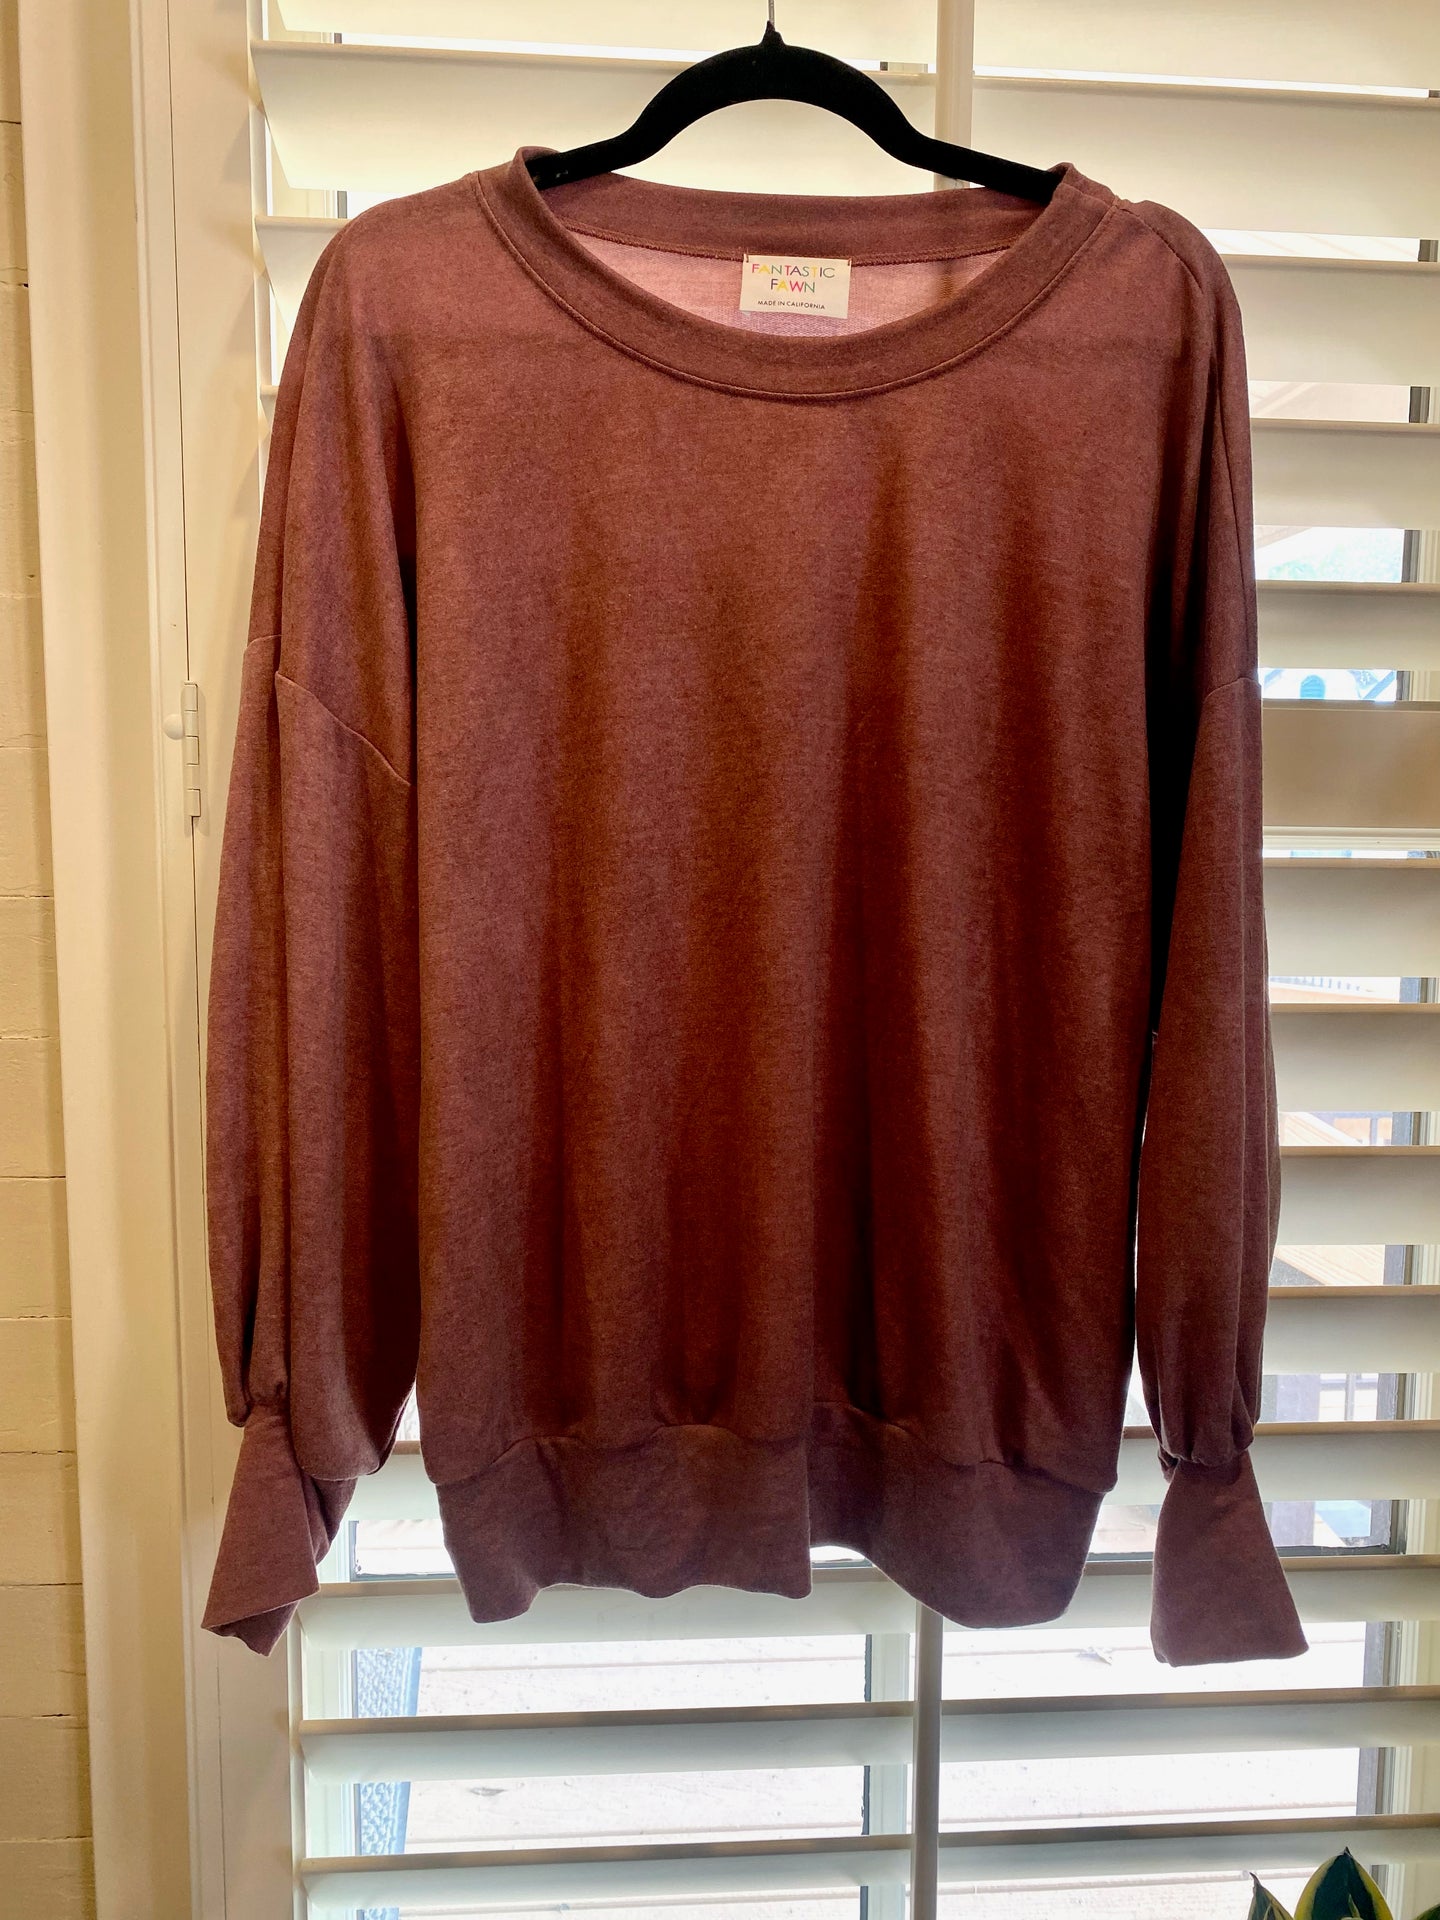 Knit Long Sleeve Top